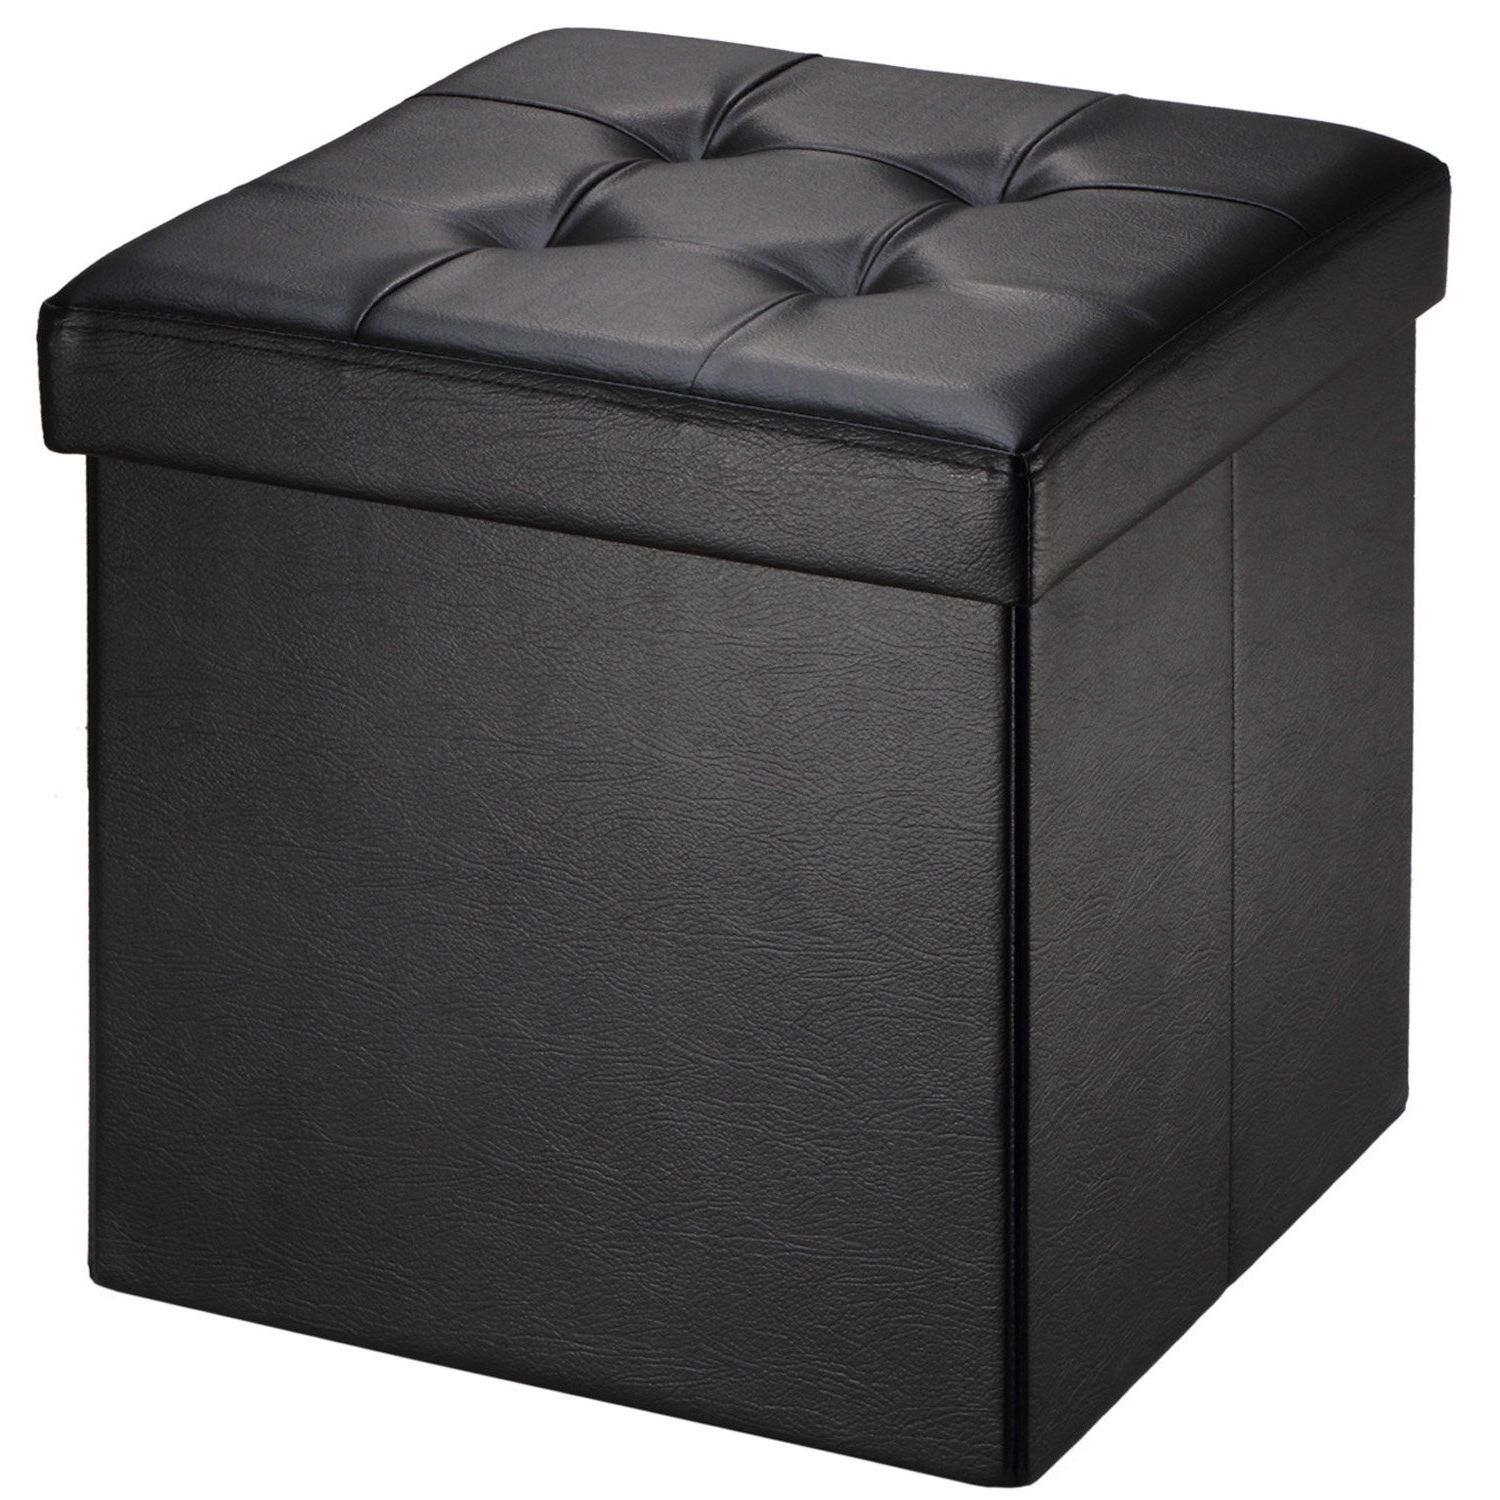 Black Faux Leather Ottomans With Pull Tab In Recent Ollieroo 15inch Faux Leather Folding Collapsible Storage Ottoman Bench (View 4 of 10)